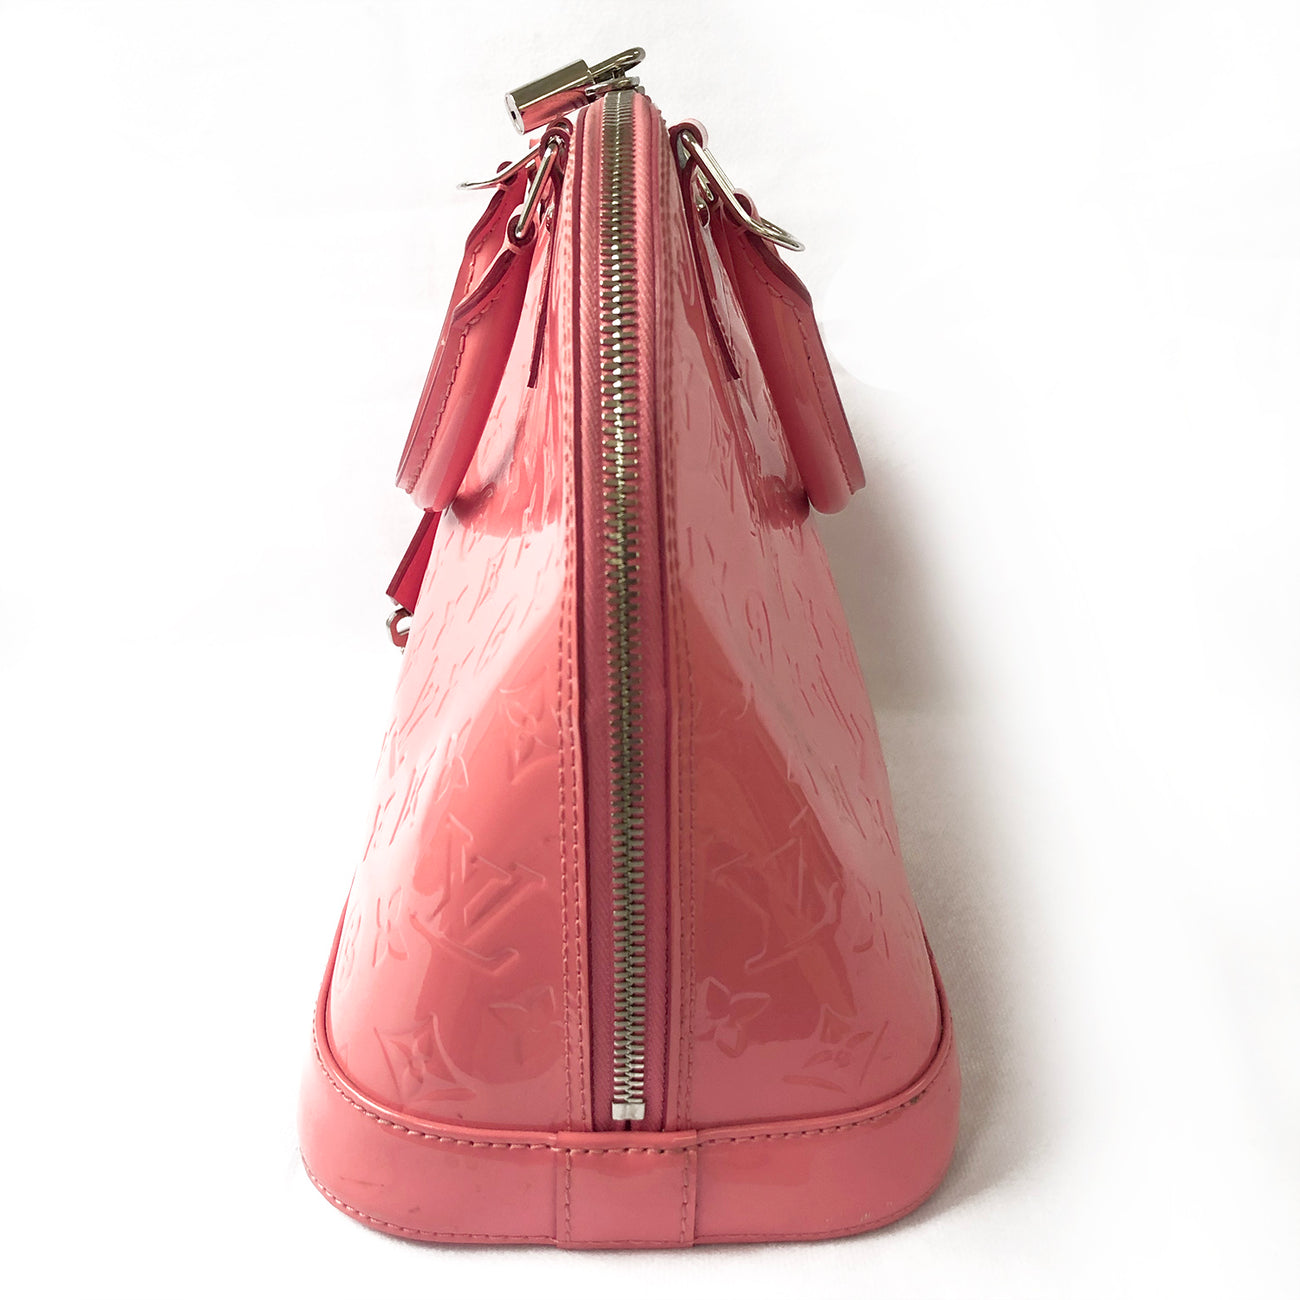 LOUIS VUITTON Alma Bag in Pink Monogram Patent Leather Small